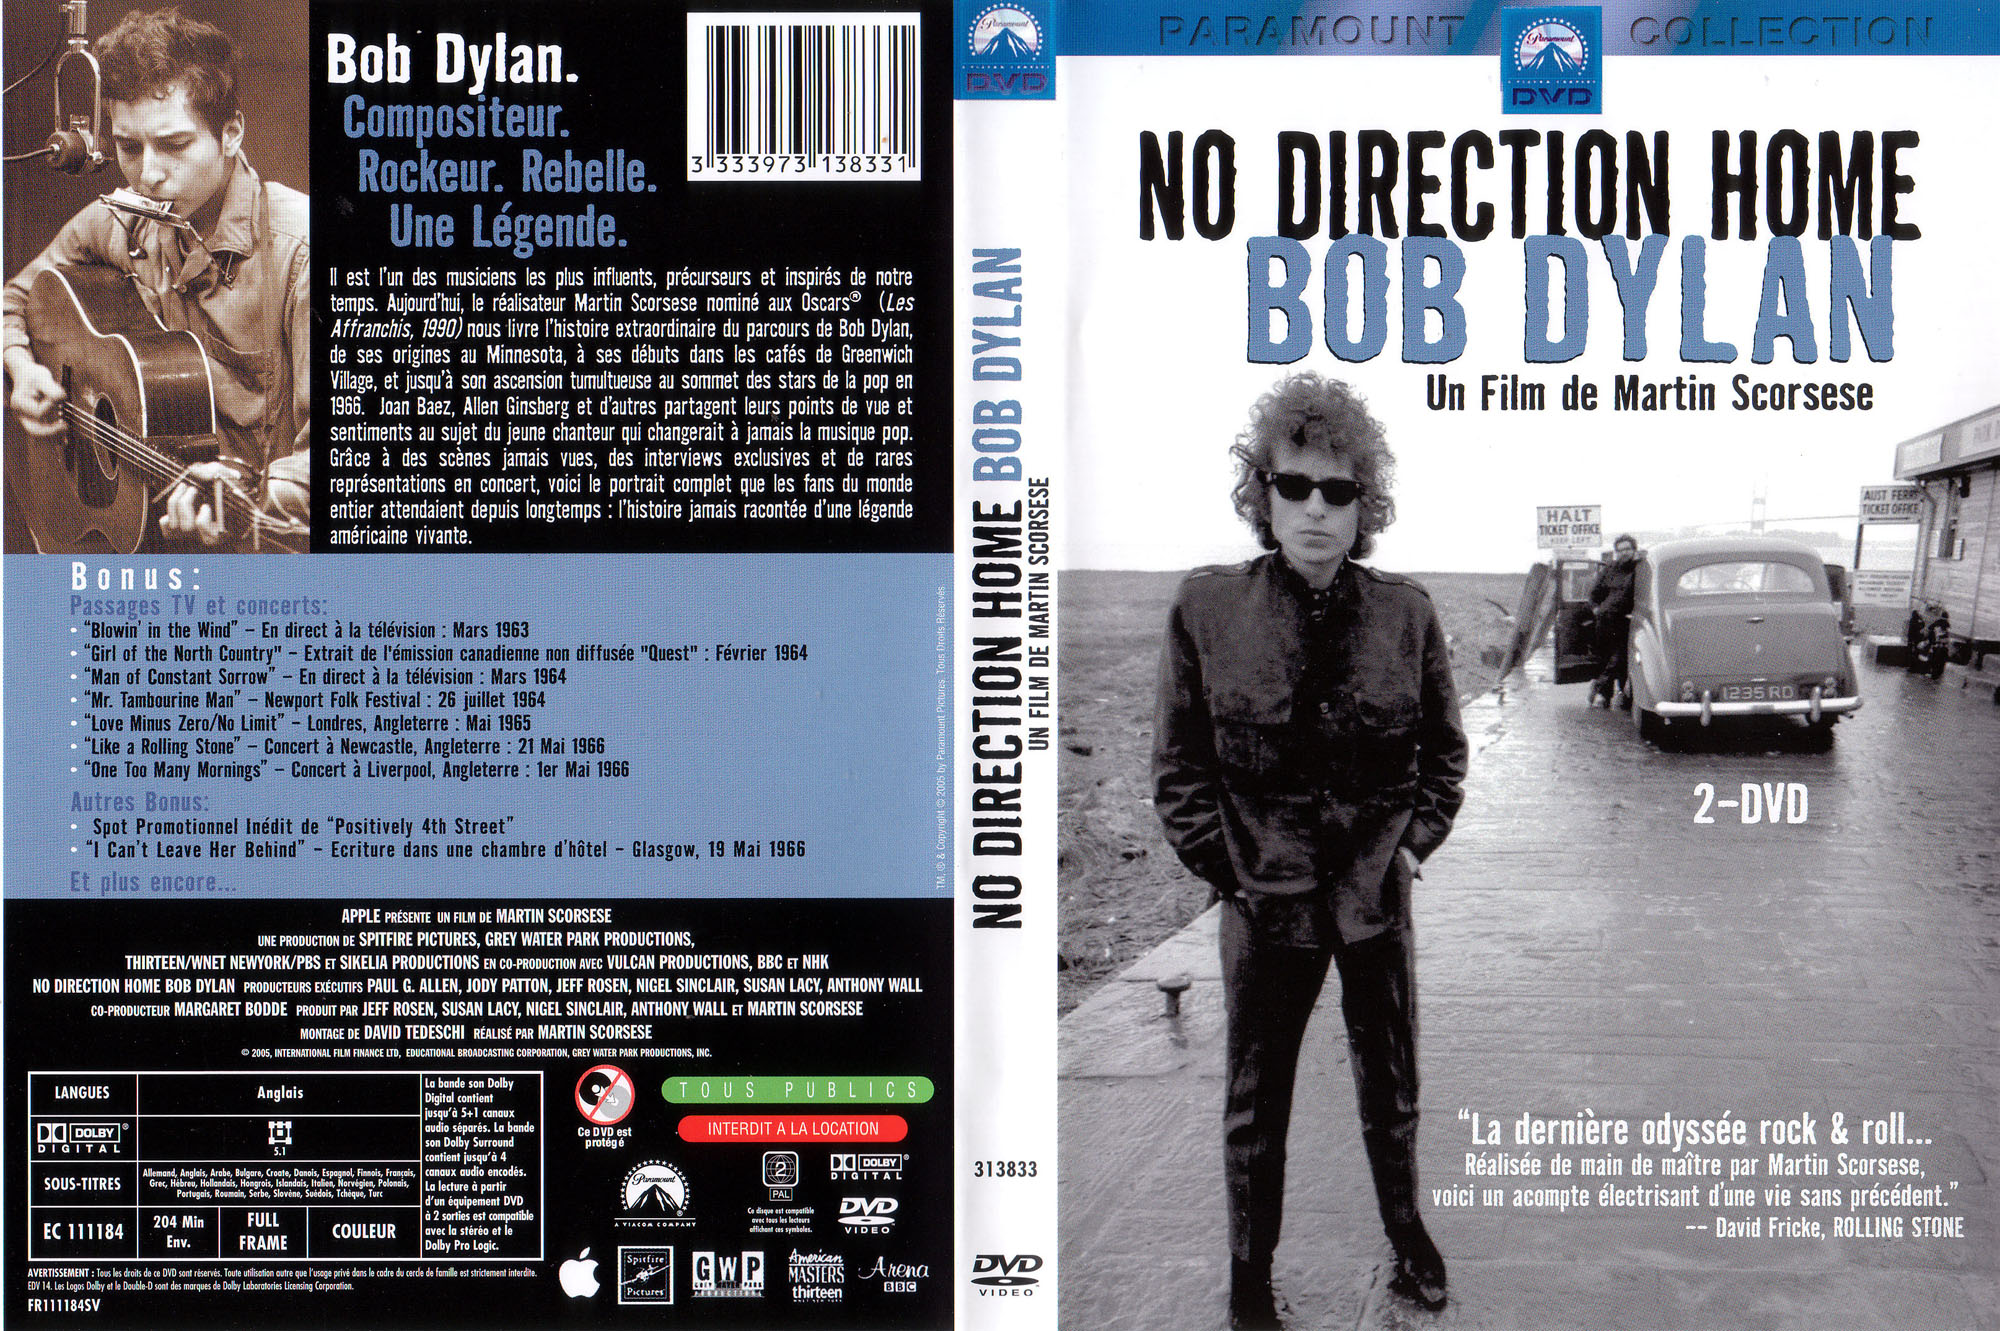 Jaquette DVD Bob Dylan - No direction home